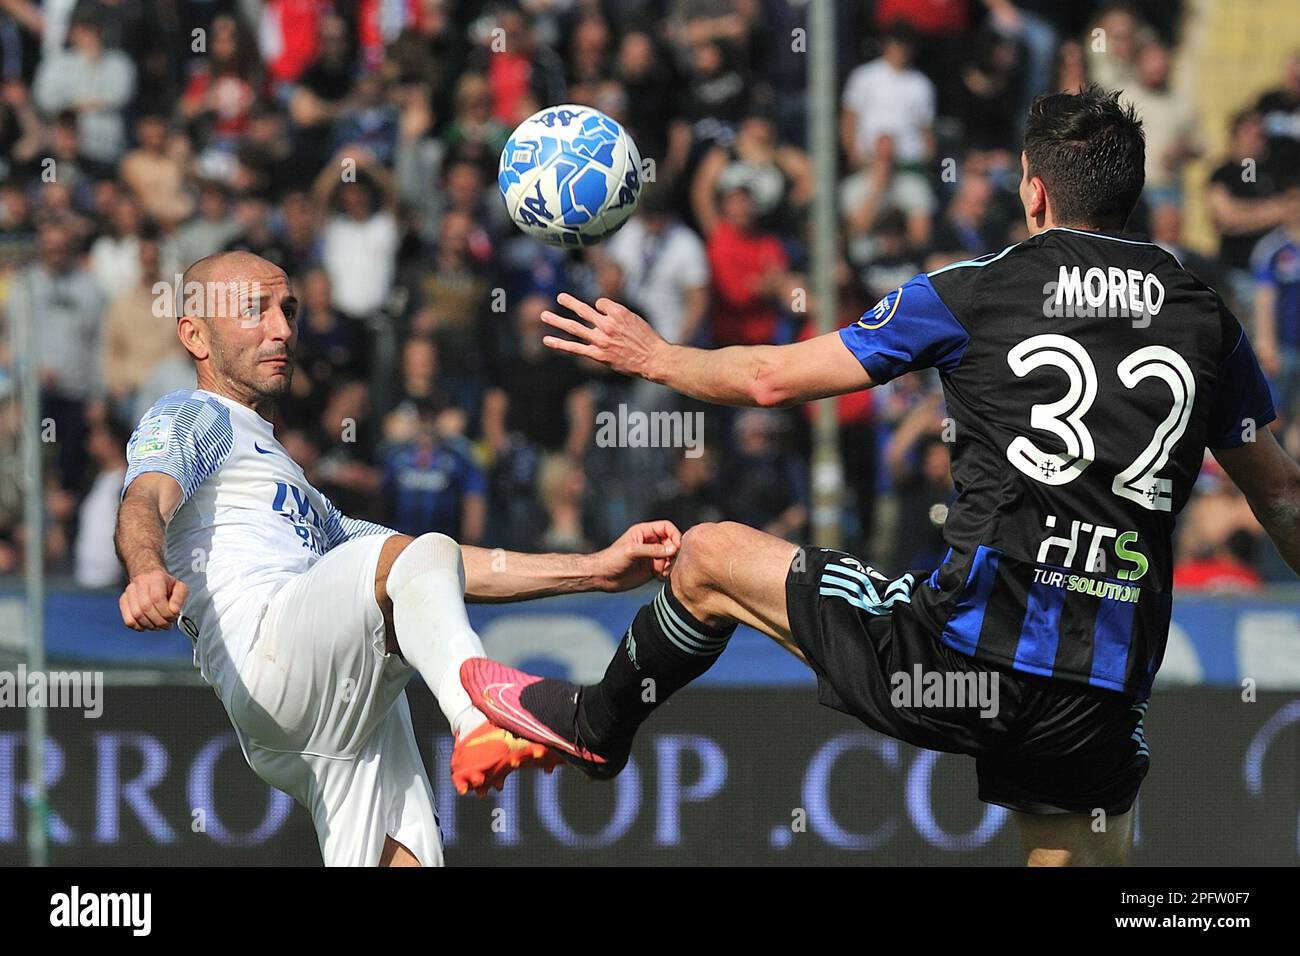 Pisa, Italy. 18th Mar, 2023. Pasquale Schiattarella (Benevento) and Stefano Moreo (Pisa) fighrt for the ball during AC Pisa vs Benevento Calcio, Italian soccer Serie B match in Pisa, Italy, March 18 2023 Credit: Independent Photo Agency/Alamy Live News Stock Photo